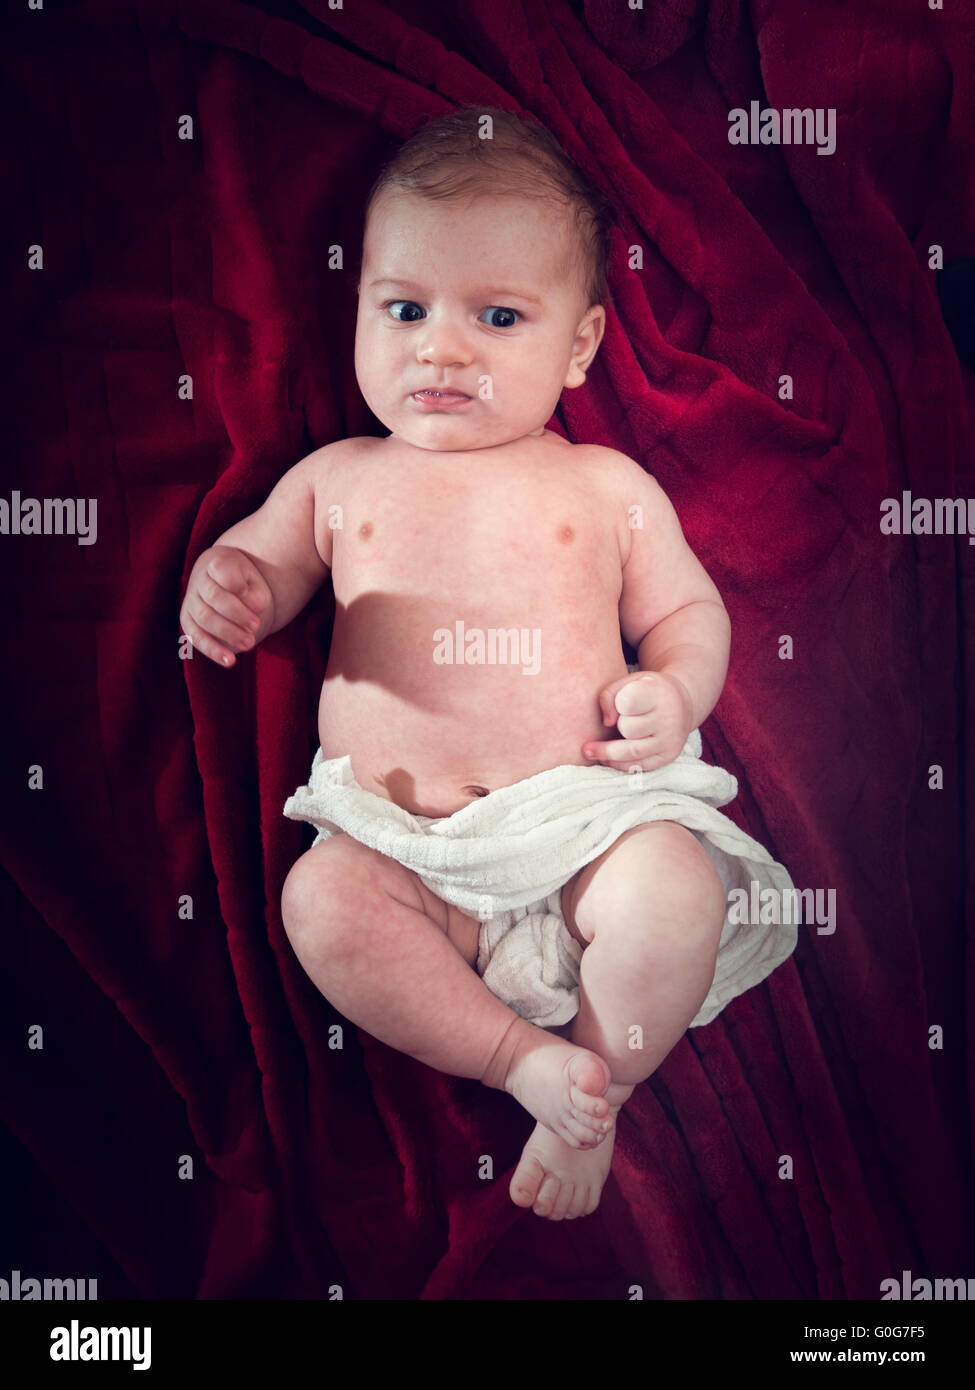 Cute 3 months baby lying on cosy red blanket. Full body view from the top. Stock Photo